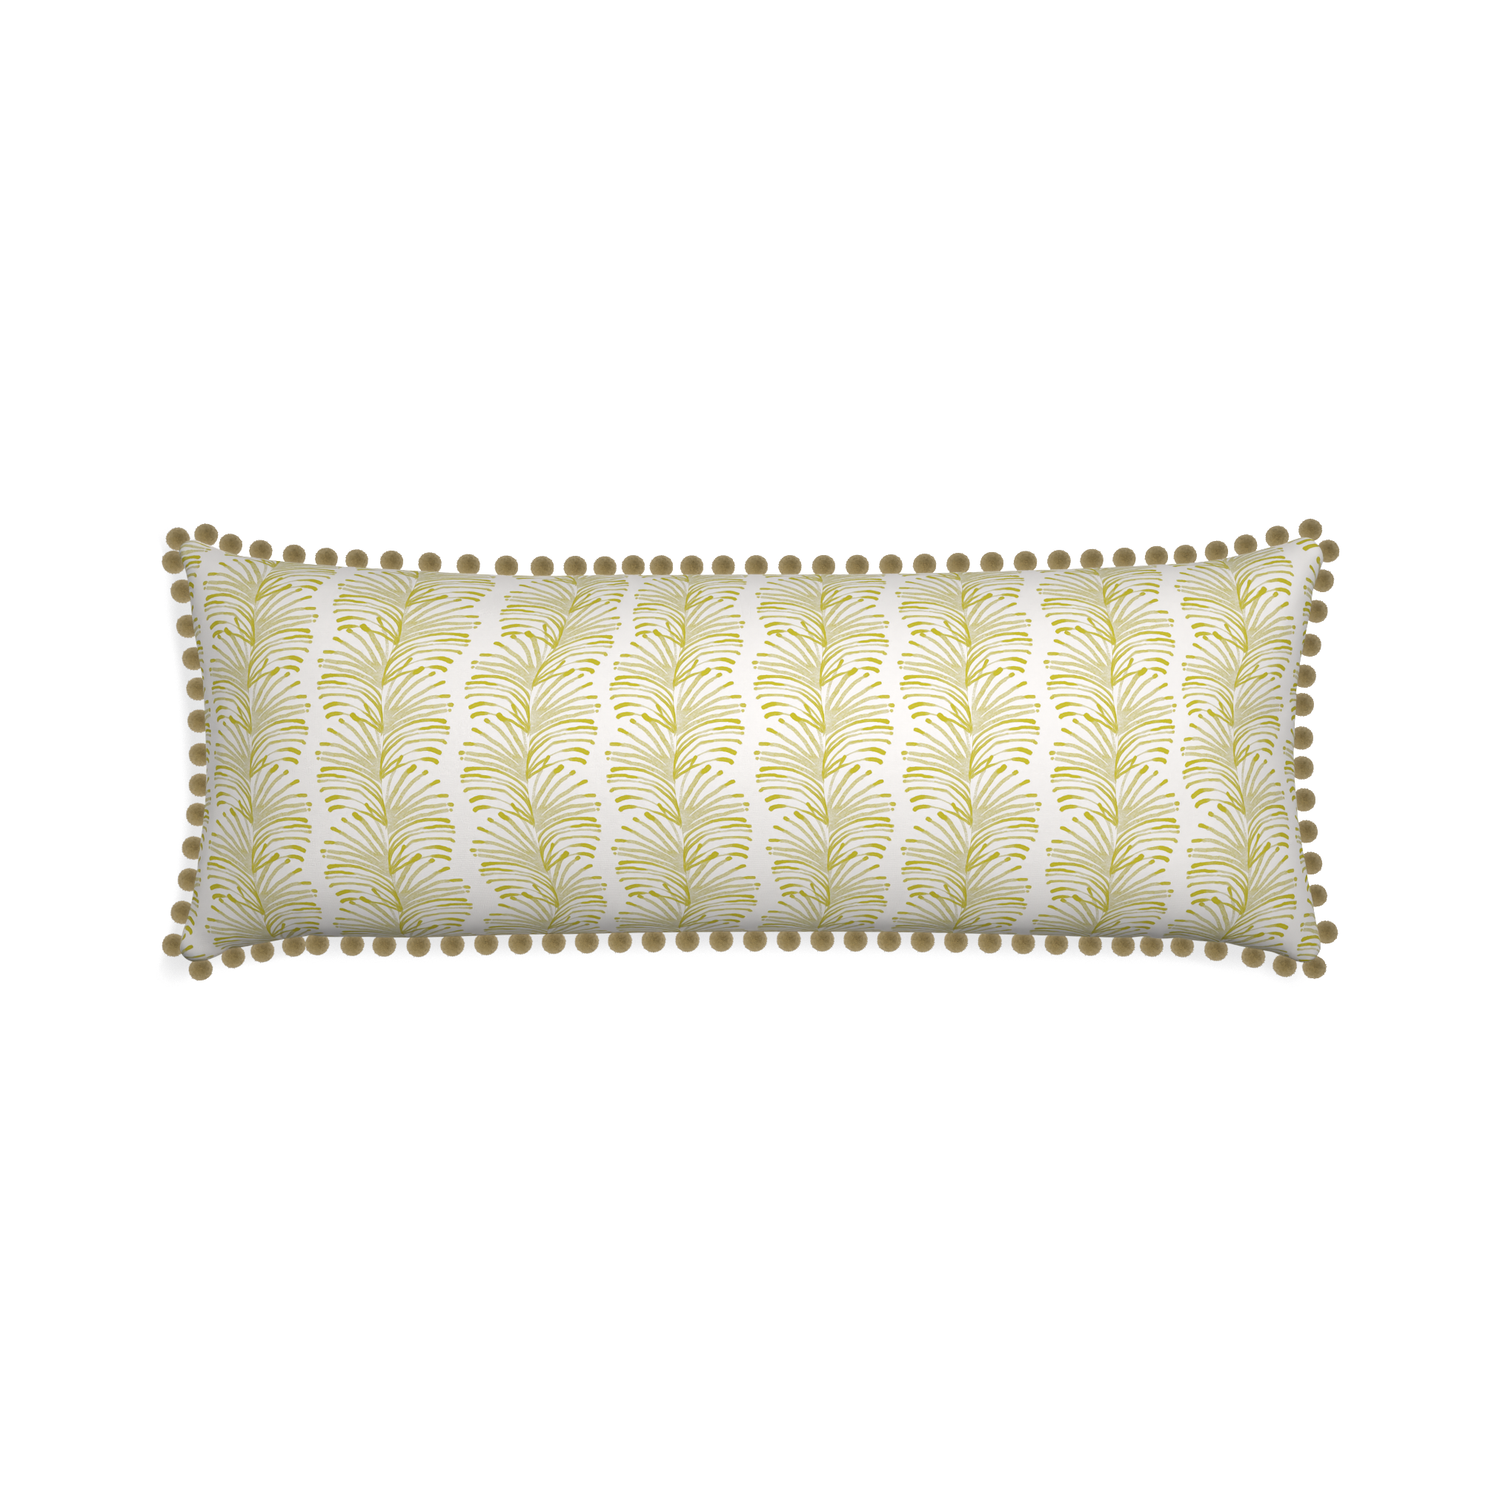 Xl-lumbar emma chartreuse custom pillow with olive pom pom on white background